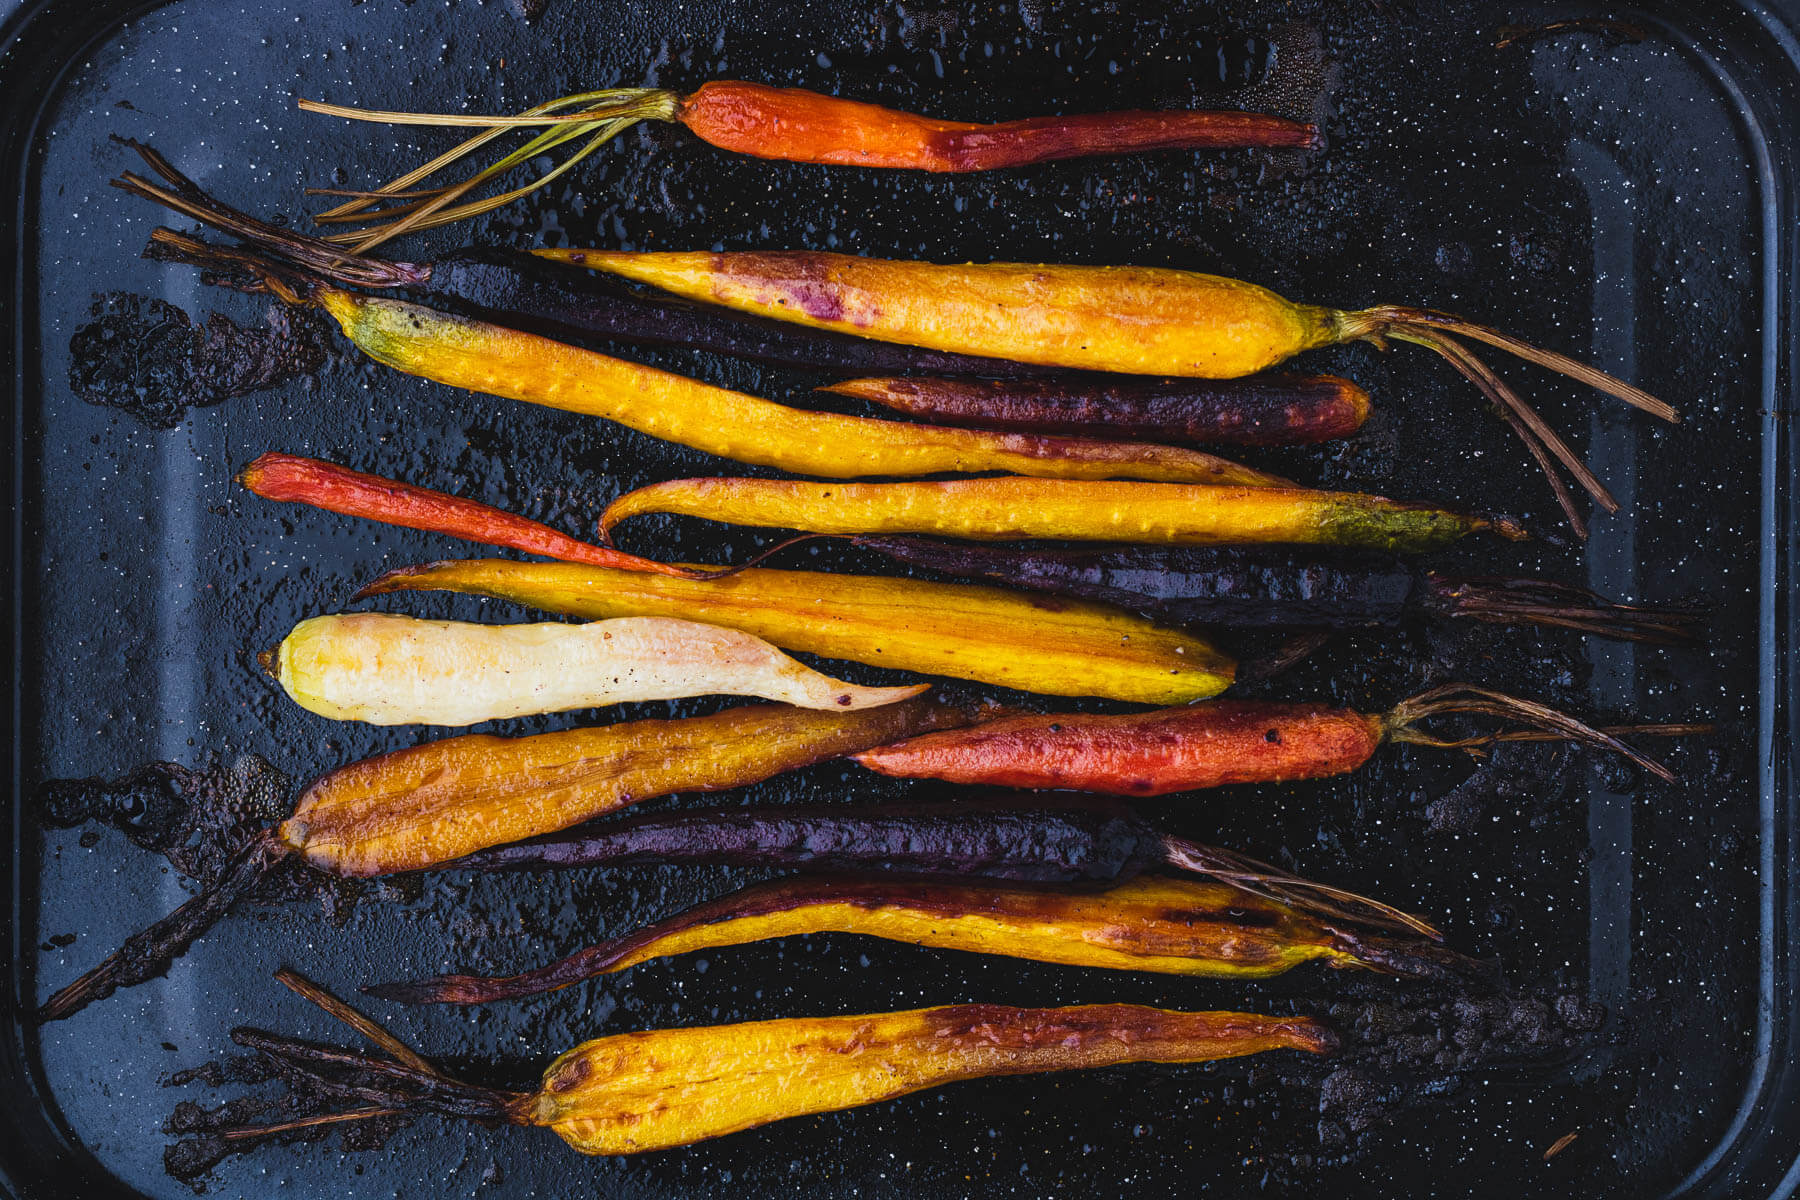 Colourful Maple Balsamic Roasted Carrots in a dark roasting pan.